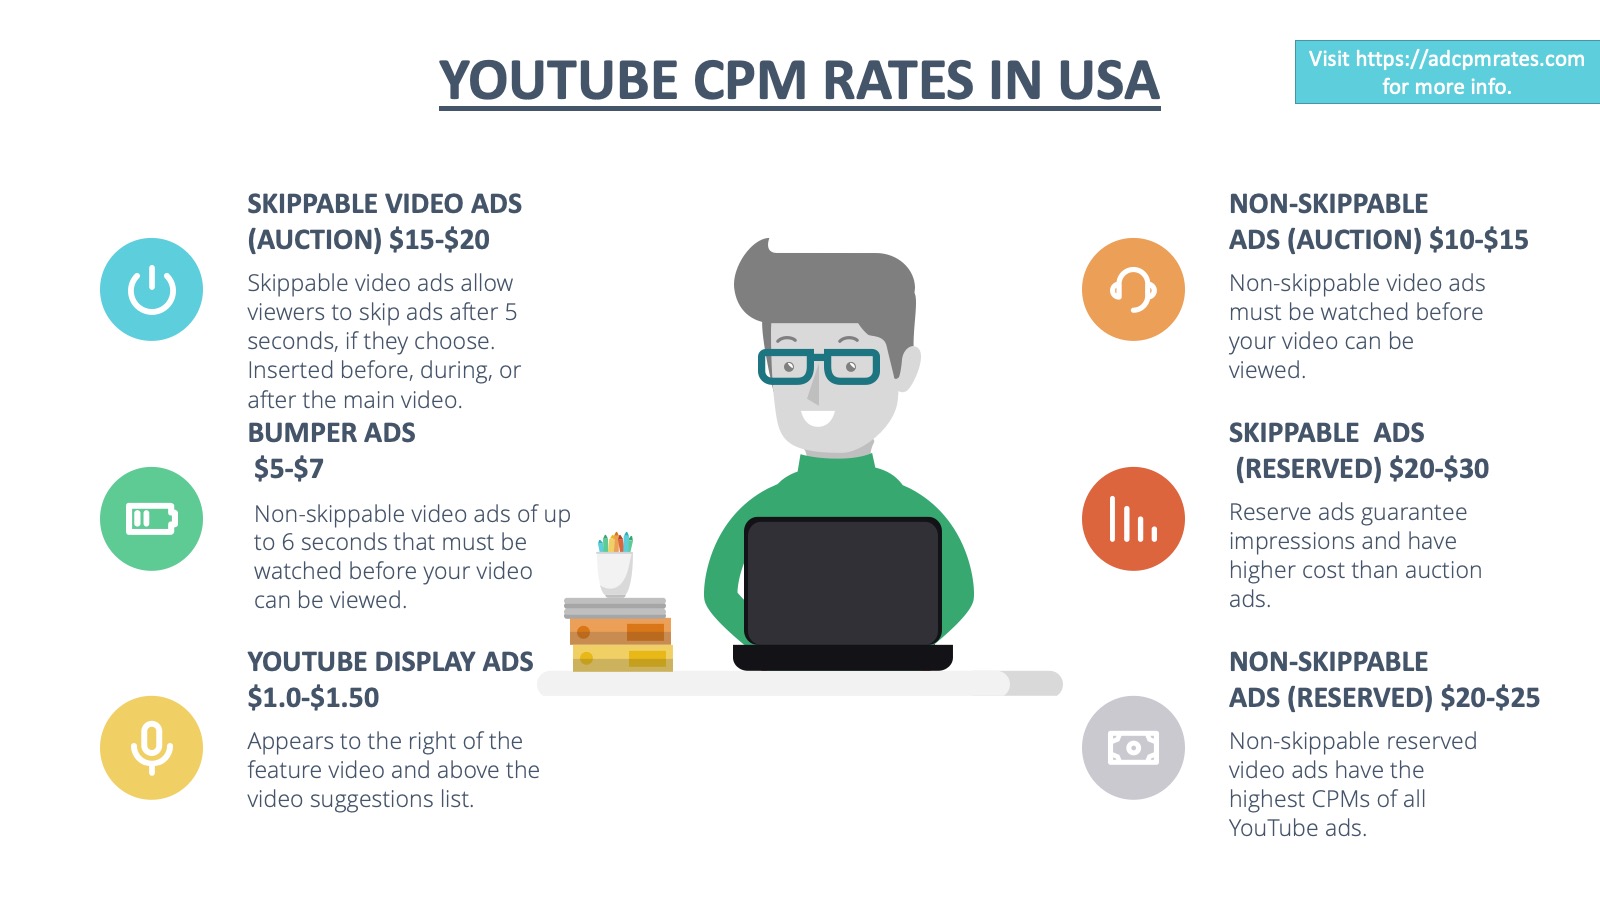 What Are Average CPM Rates in 2015?